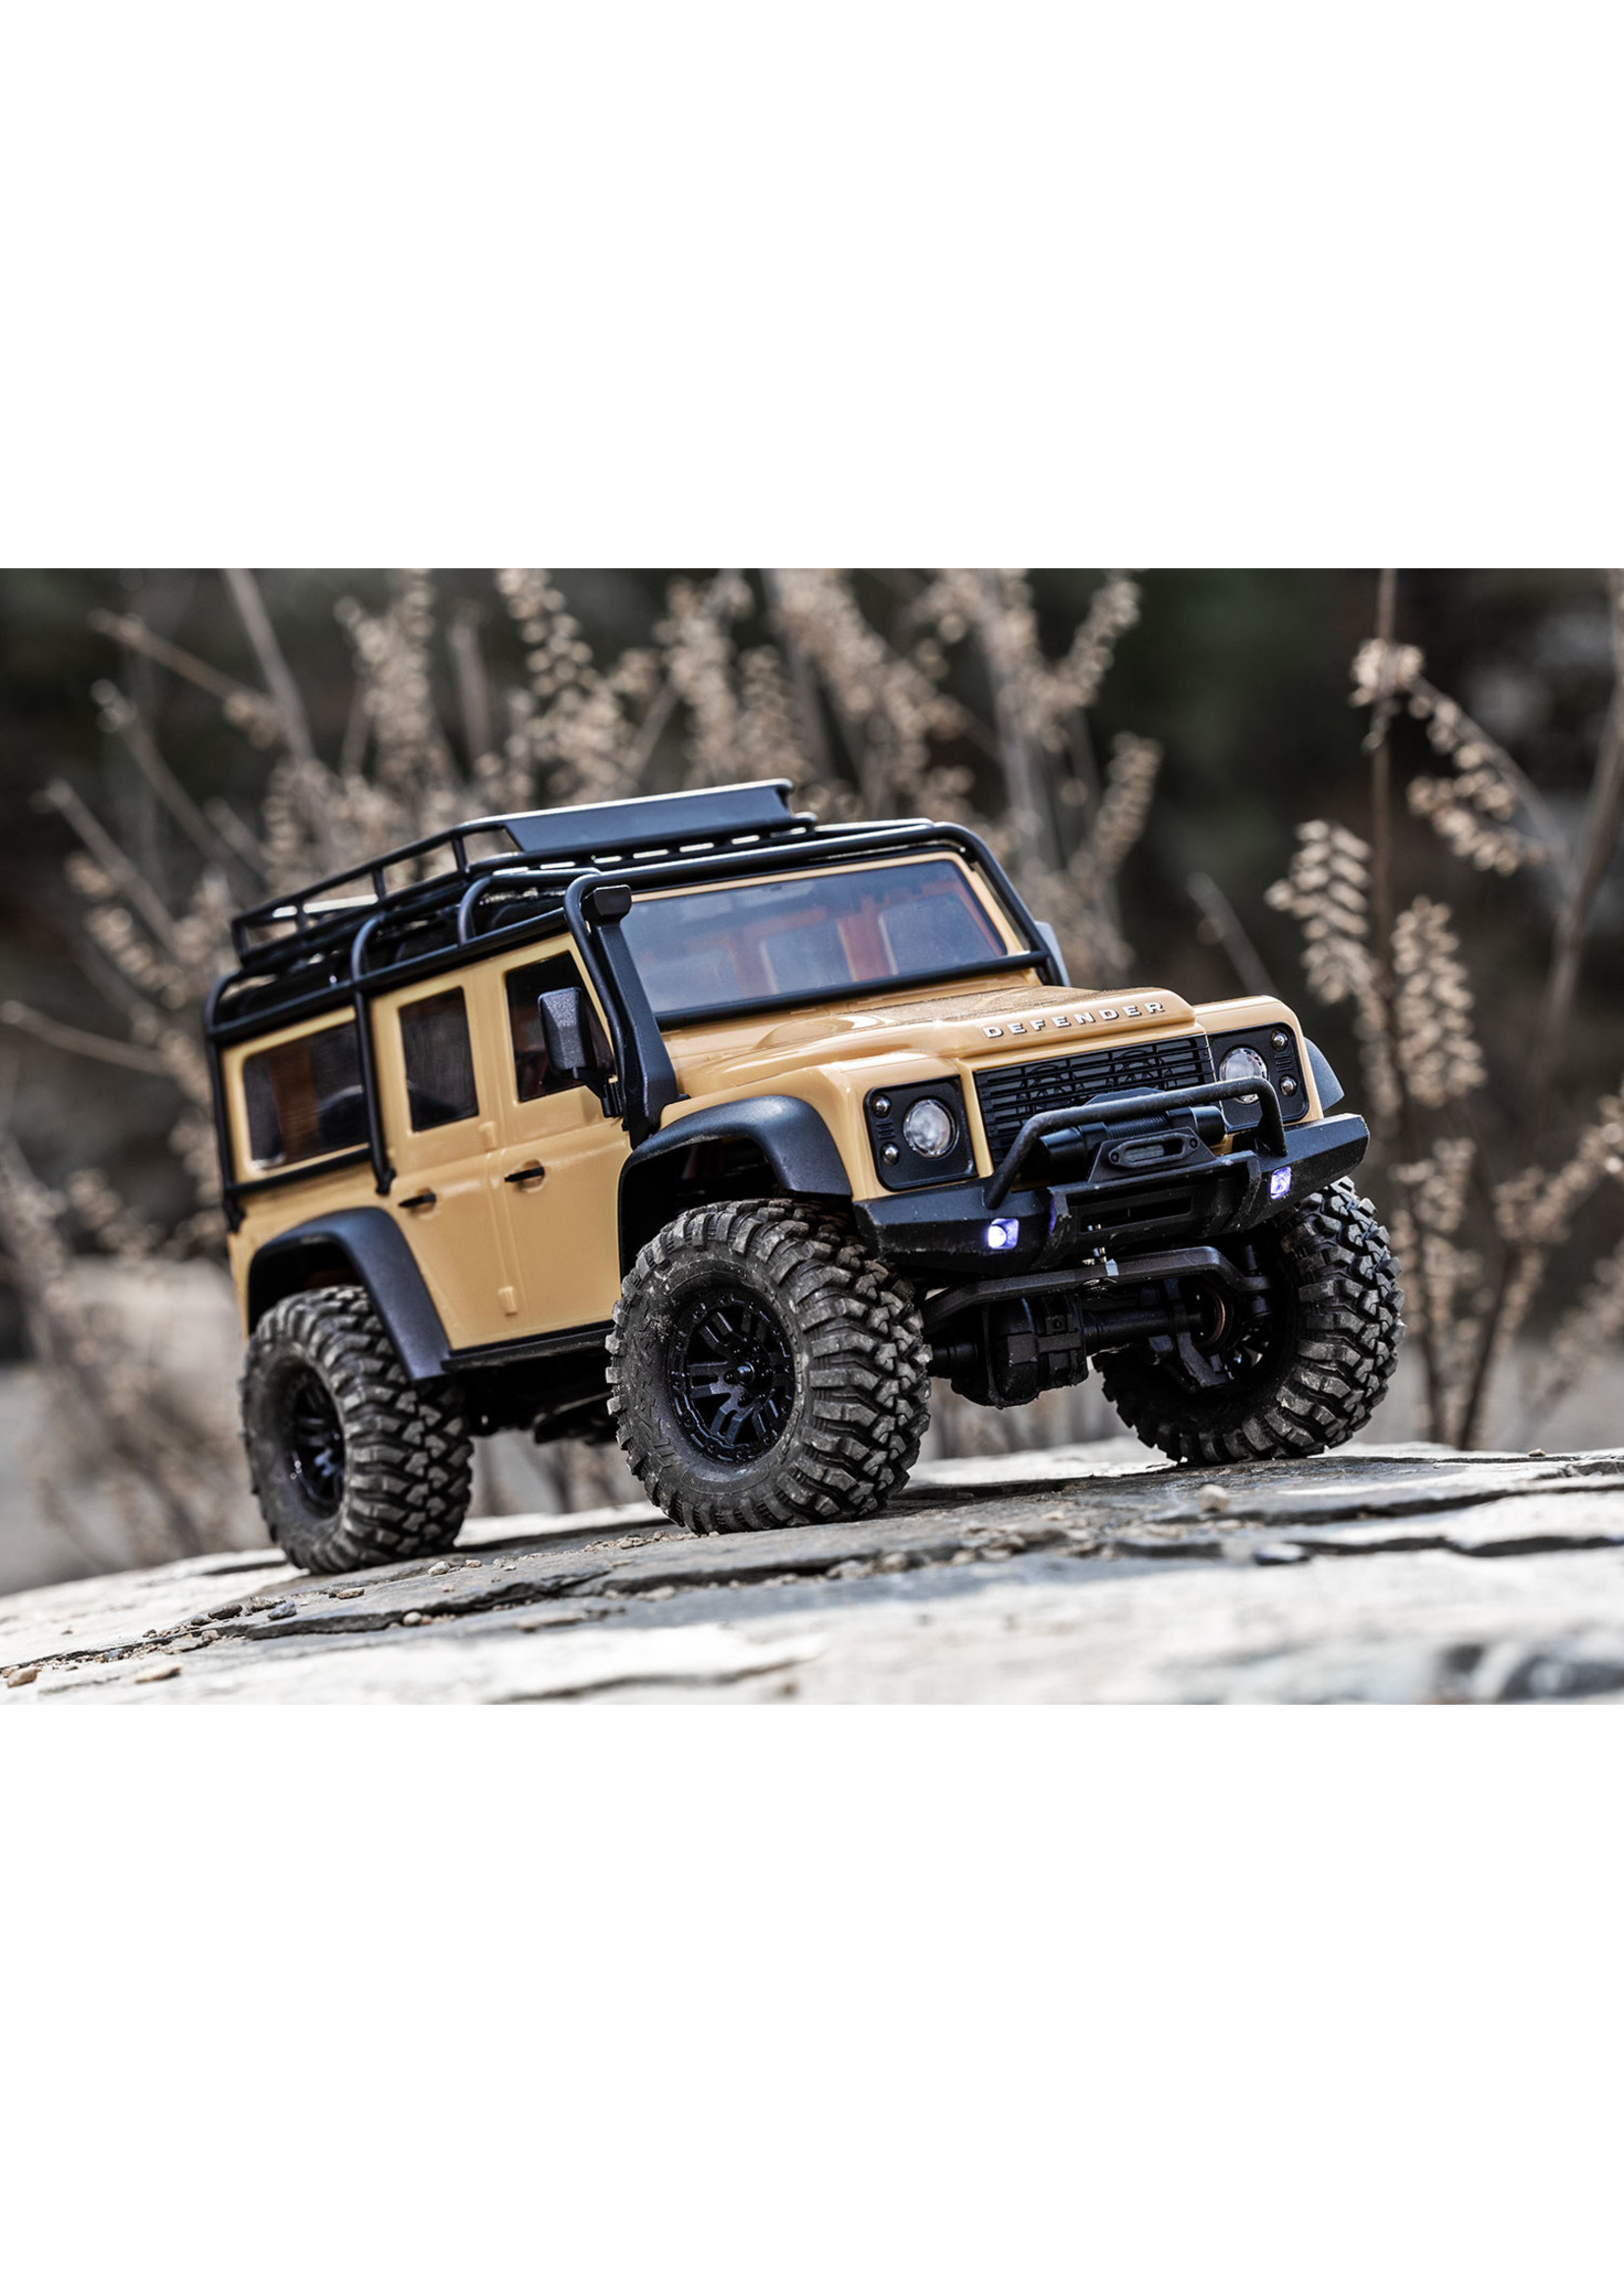 Traxxas 970541TAN - 1/18 RTR Scale and Trail Defender - Tan